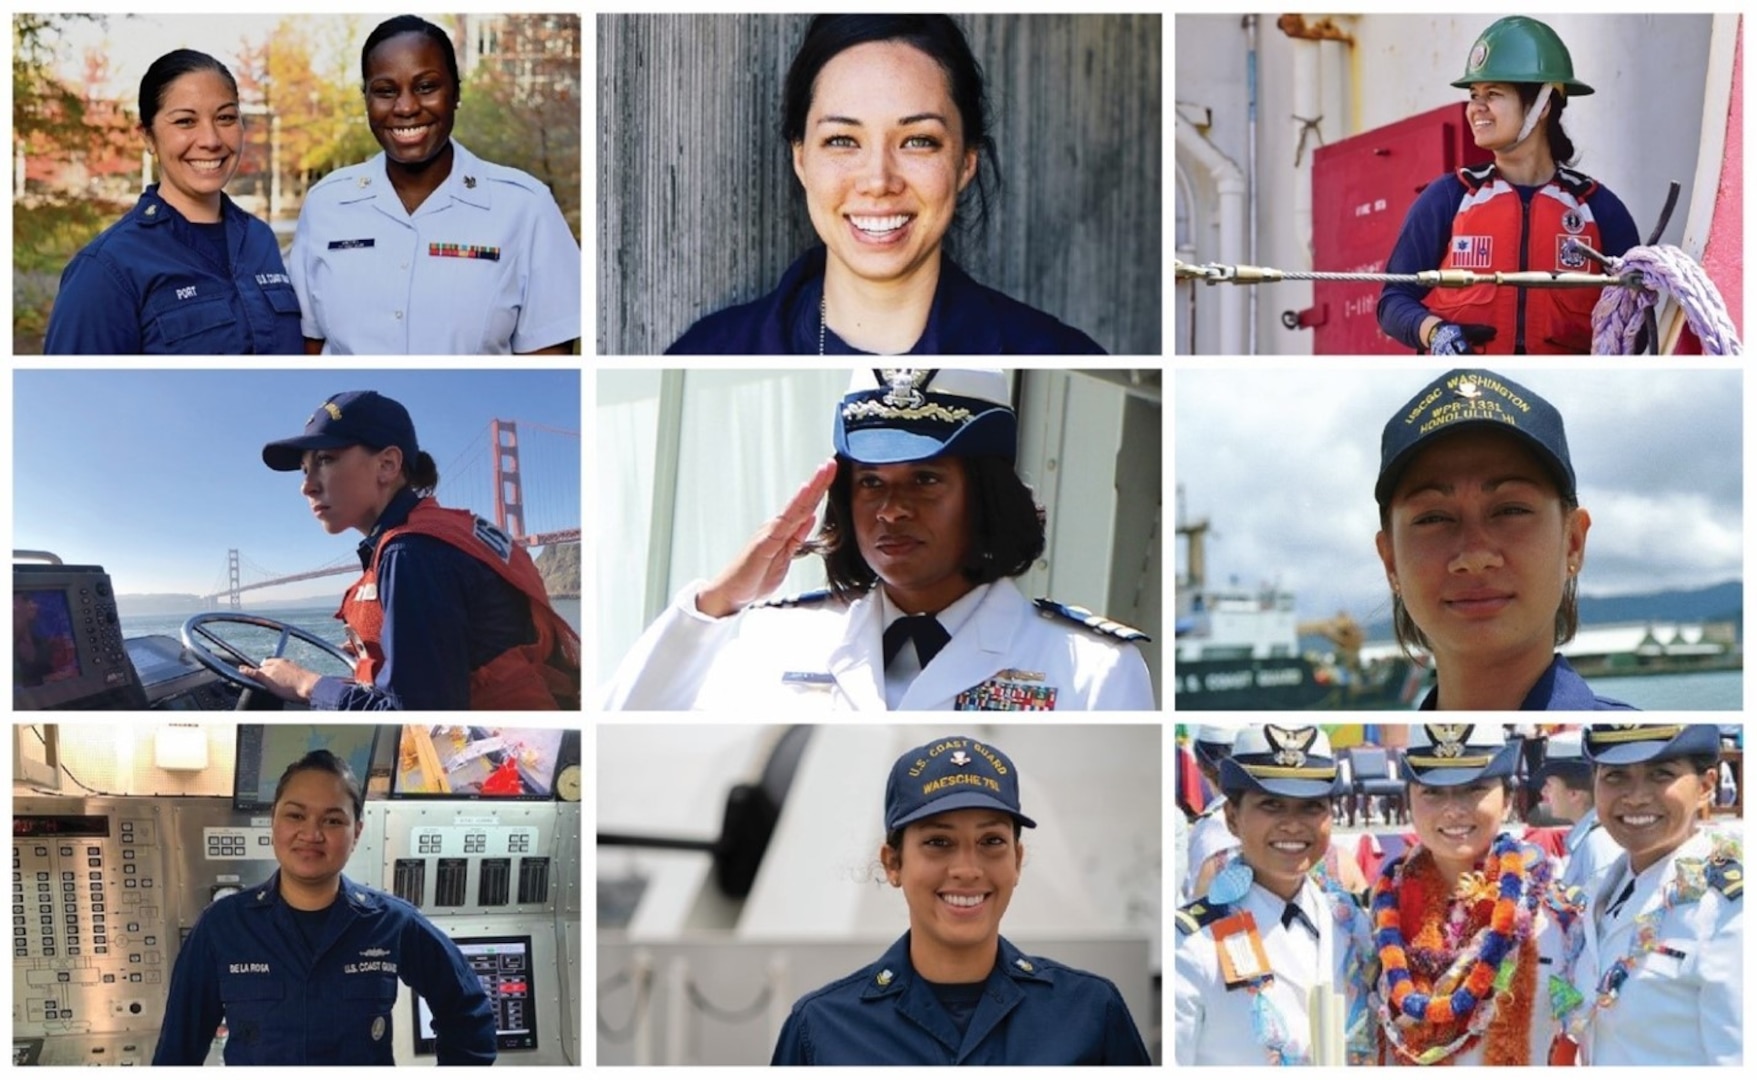 The Coast Guard has appointed 15 members to the newly established Advisory Board on Women in the Coast Guard. Consistent with guidance directed by Public Law 116–283, also known as the William (Mac) Thornberry National Defense Authorization Act for Fiscal Year 2021, the board will provide recommendations to the Commandant on matters relating to recruiting, retaining, advancing, and the wellbeing of women who serve in the Coast Guard. (U.S. Coast Guard Photo Illustration by the Office of Diversity and Inclusion).